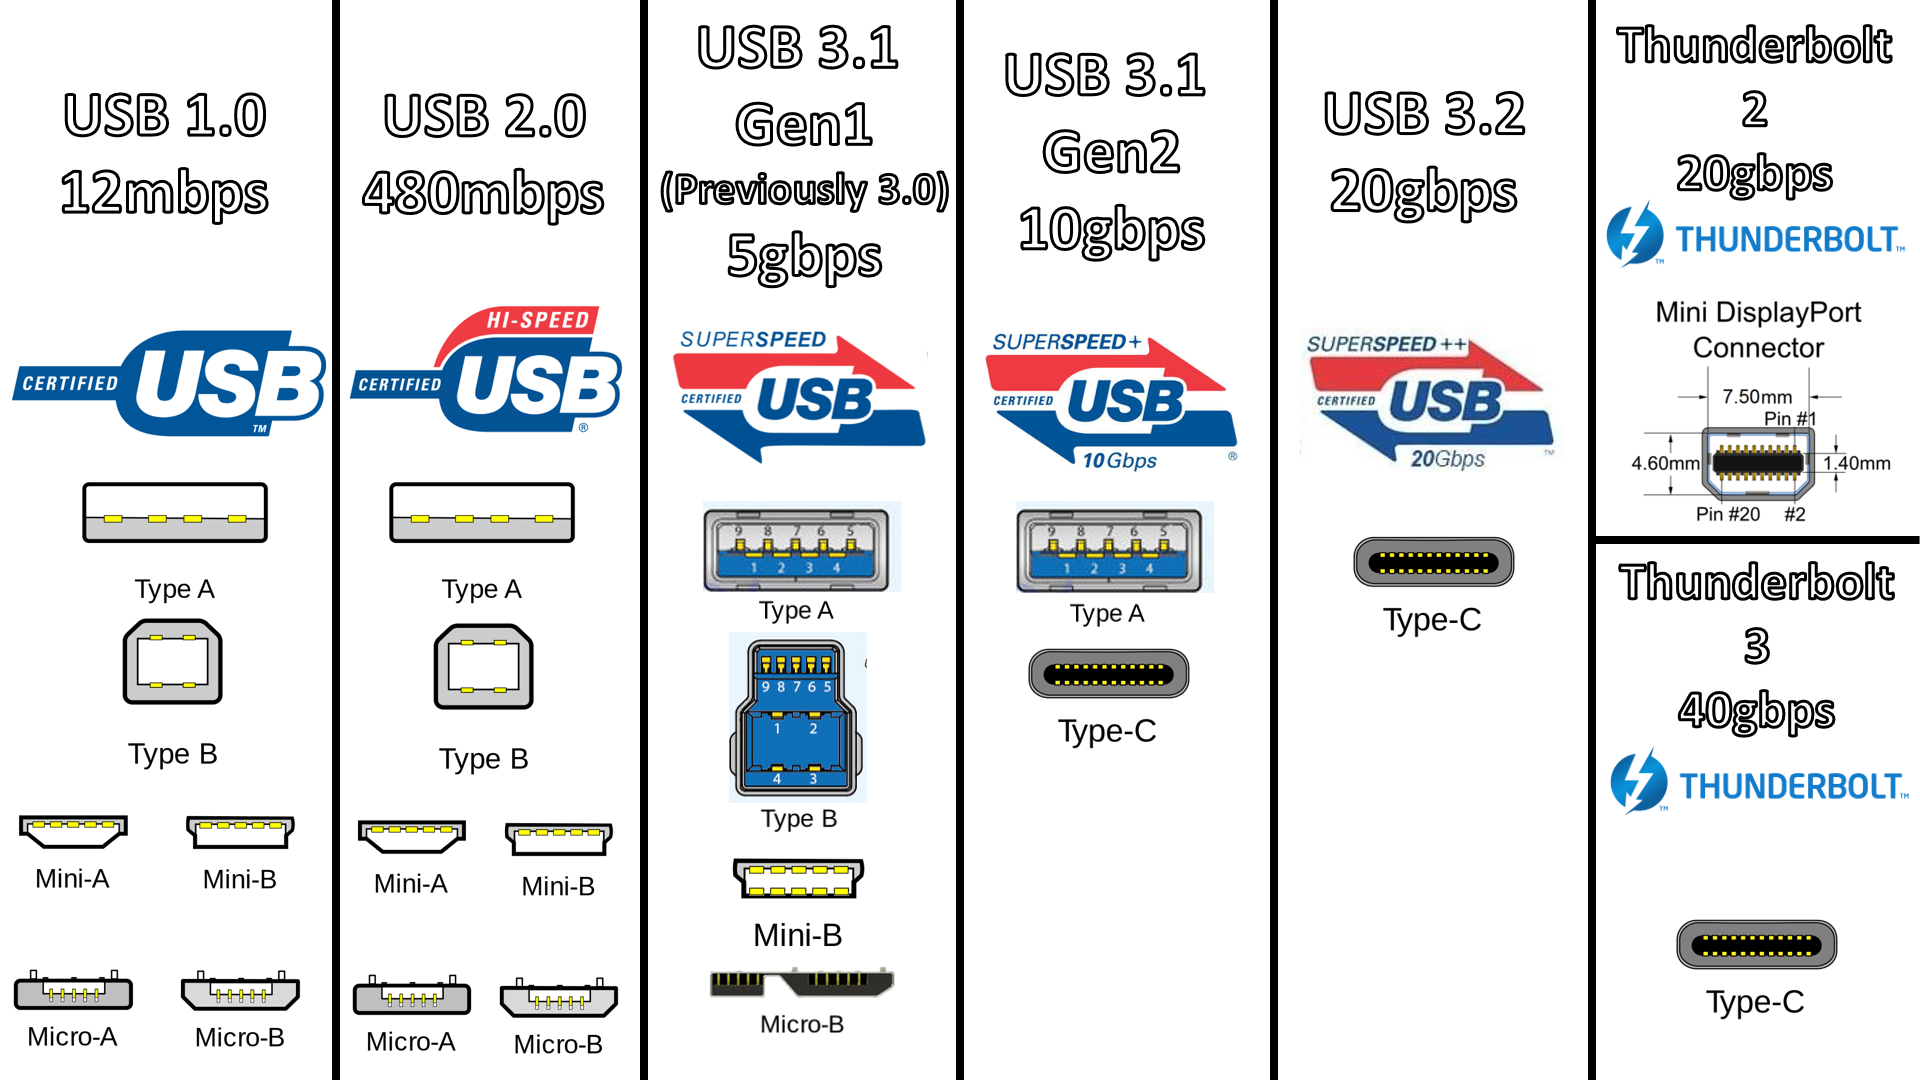 What's the Difference Between USB 3.1 Gen 1, Gen 2 and USB 3.2